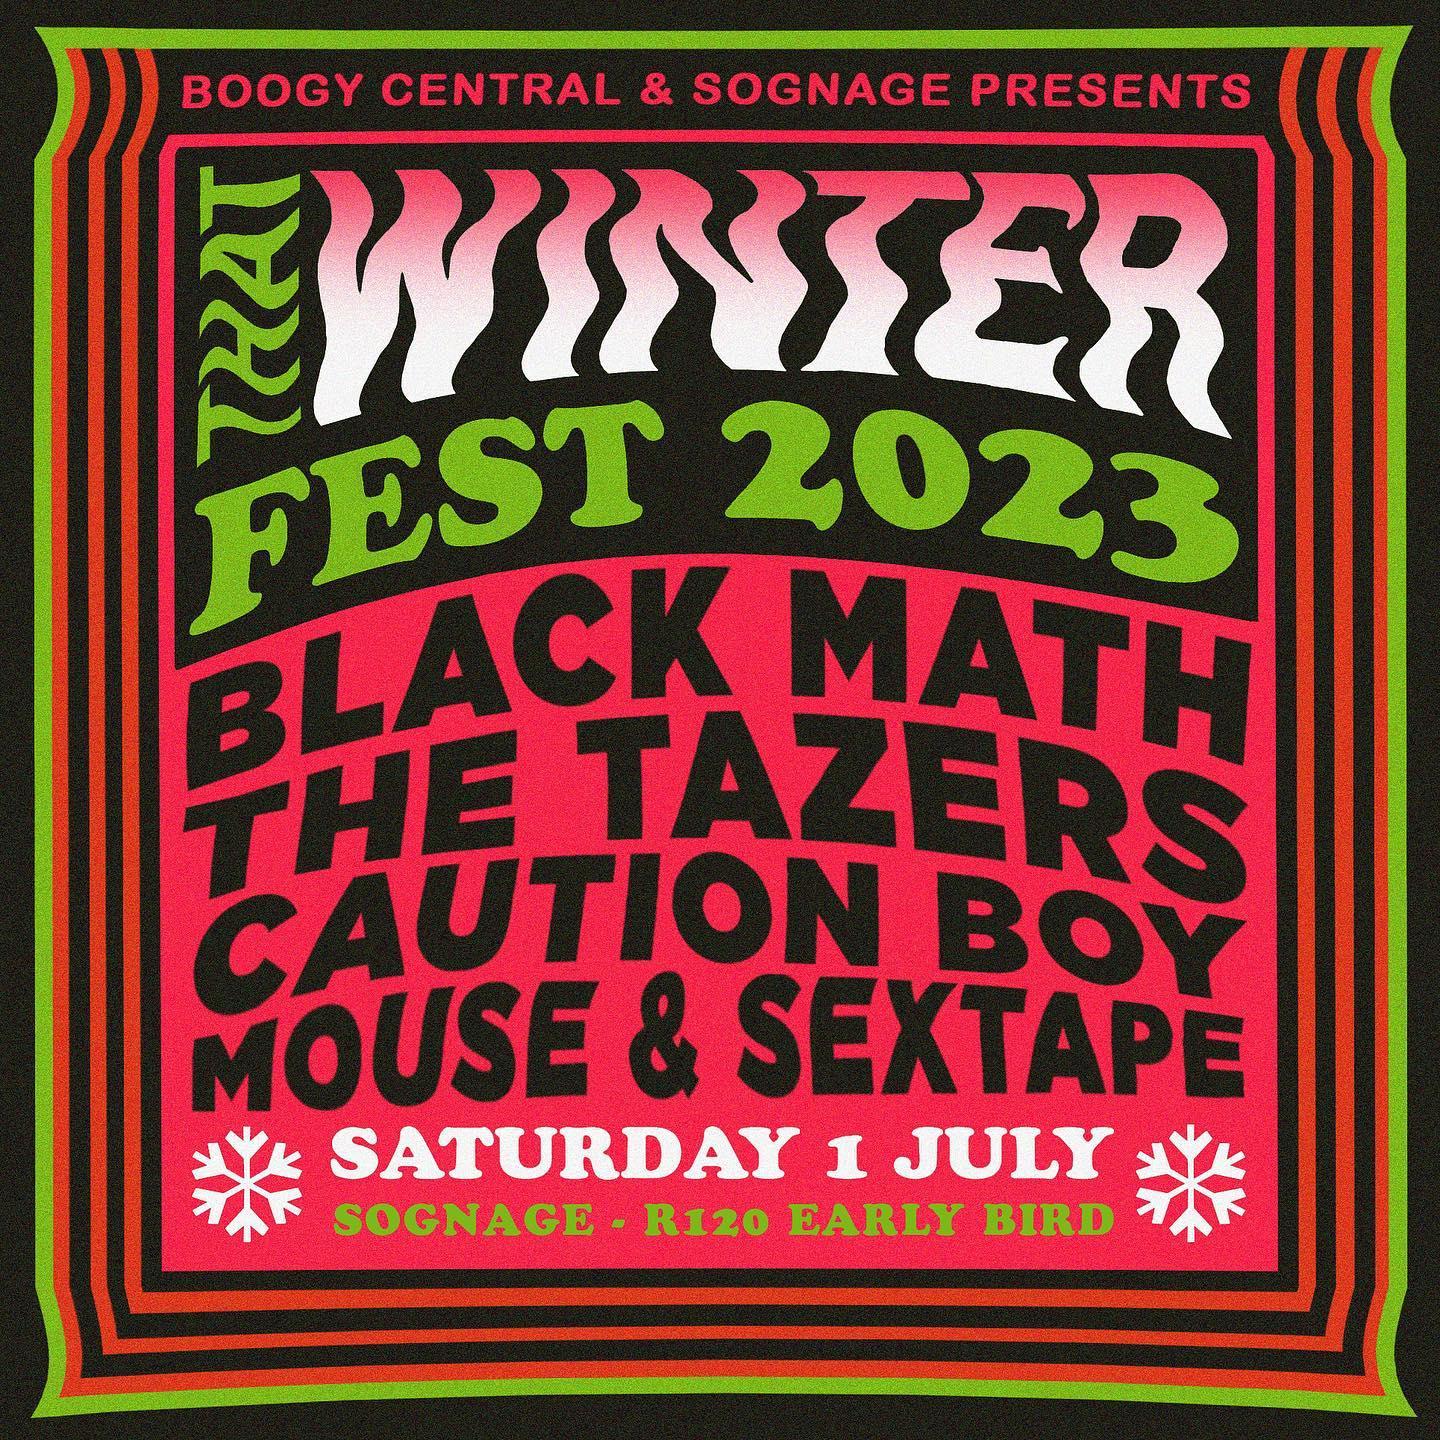 Introducing ❄️THAT WINTER FEST❄️

A new annual event designed to kick away those winter blues with the best psych rock lineups you’ve ever seen! 😍

Behold our first edition featuring: 
@blackmathza 
@thetazers (EP Launch) 
@caution_boy 
@mousetheband 
@011_sextape 

Saturday 01 July 2023 
@sognage 

R120 tickets on sale now! They are going to move so act quickly! Link in bio 🌈

See you there xxx

Design by @idratherbeskateboarding 